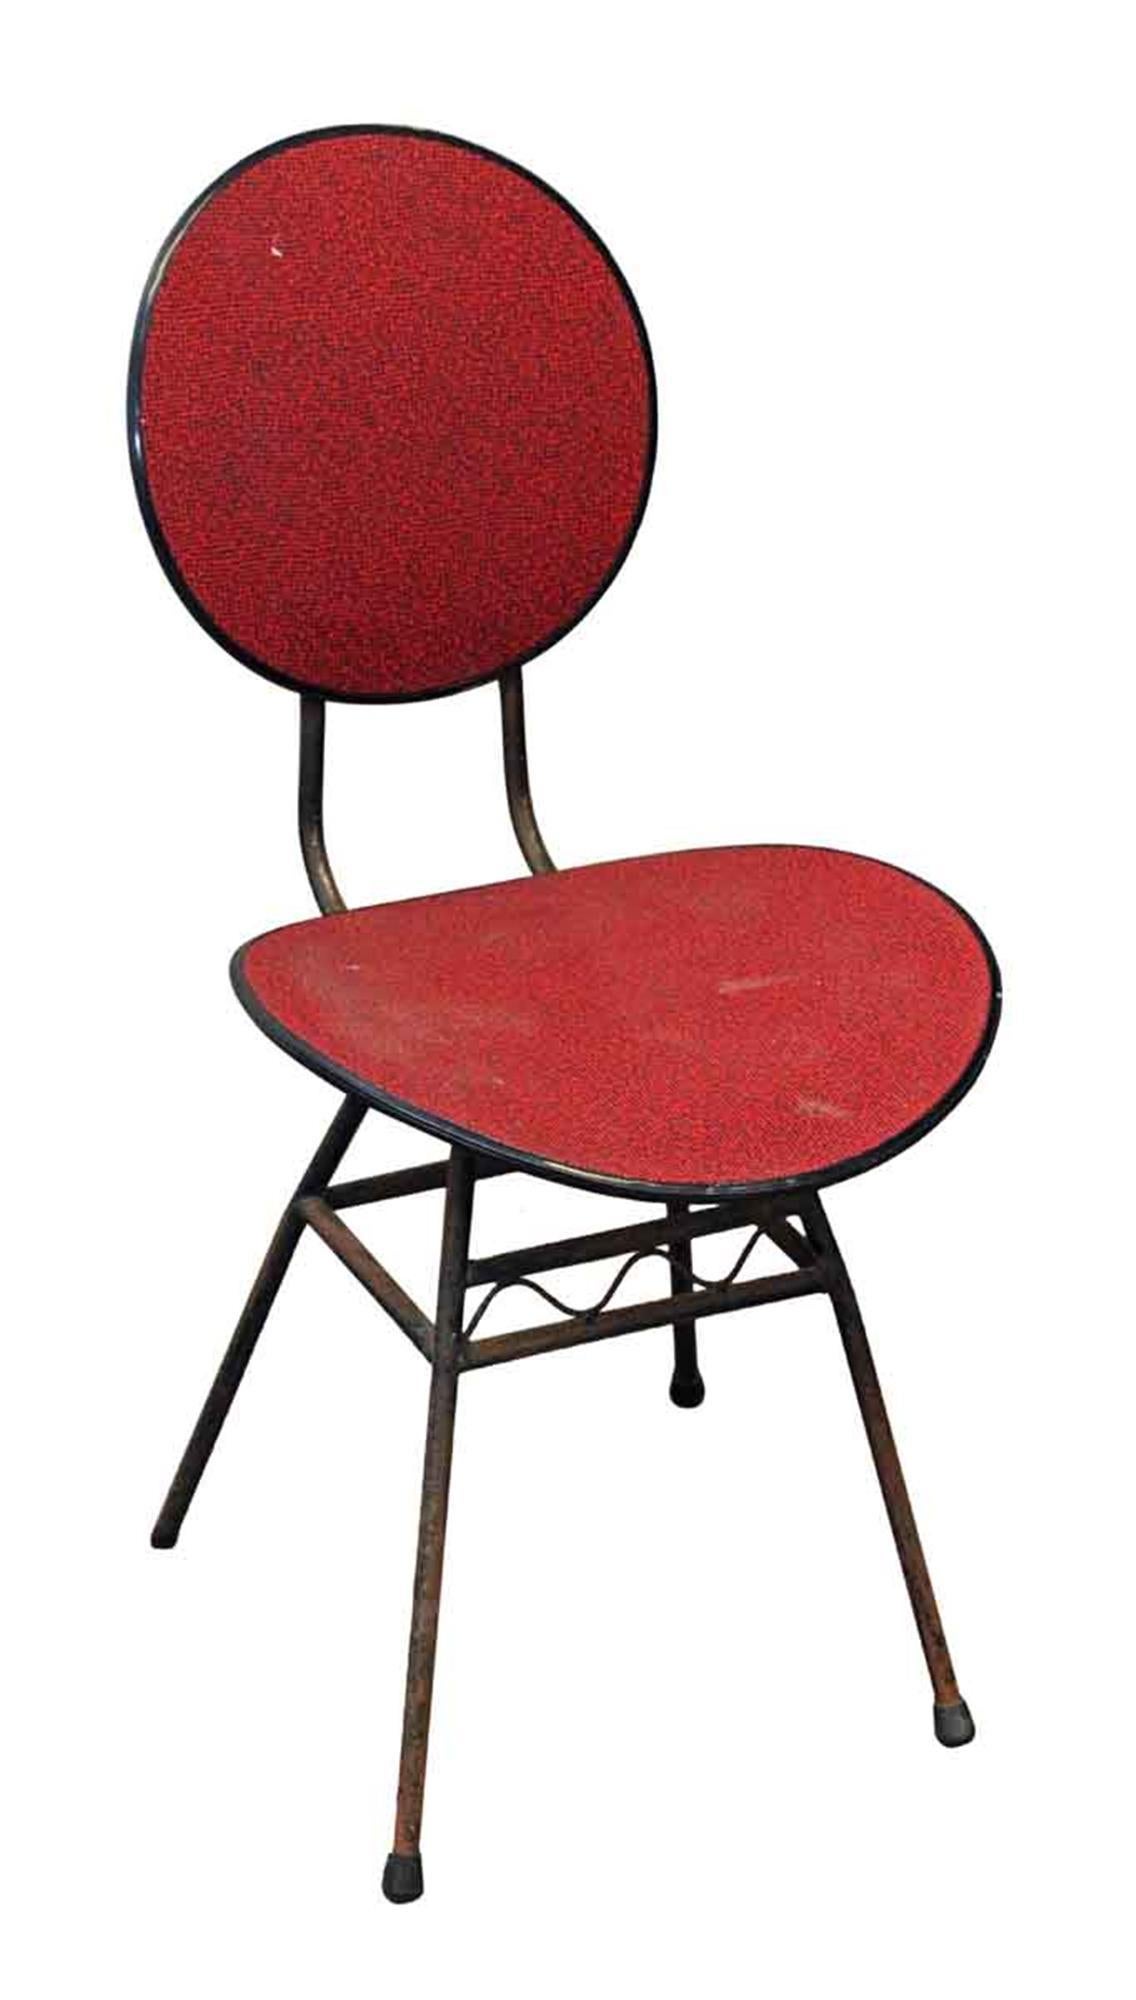 1960s Mid-Century Modern black metal frame chair with a red and black textured plastic seat and back. One available. This can be seen at our 400 Gilligan St location in Scranton, PA.